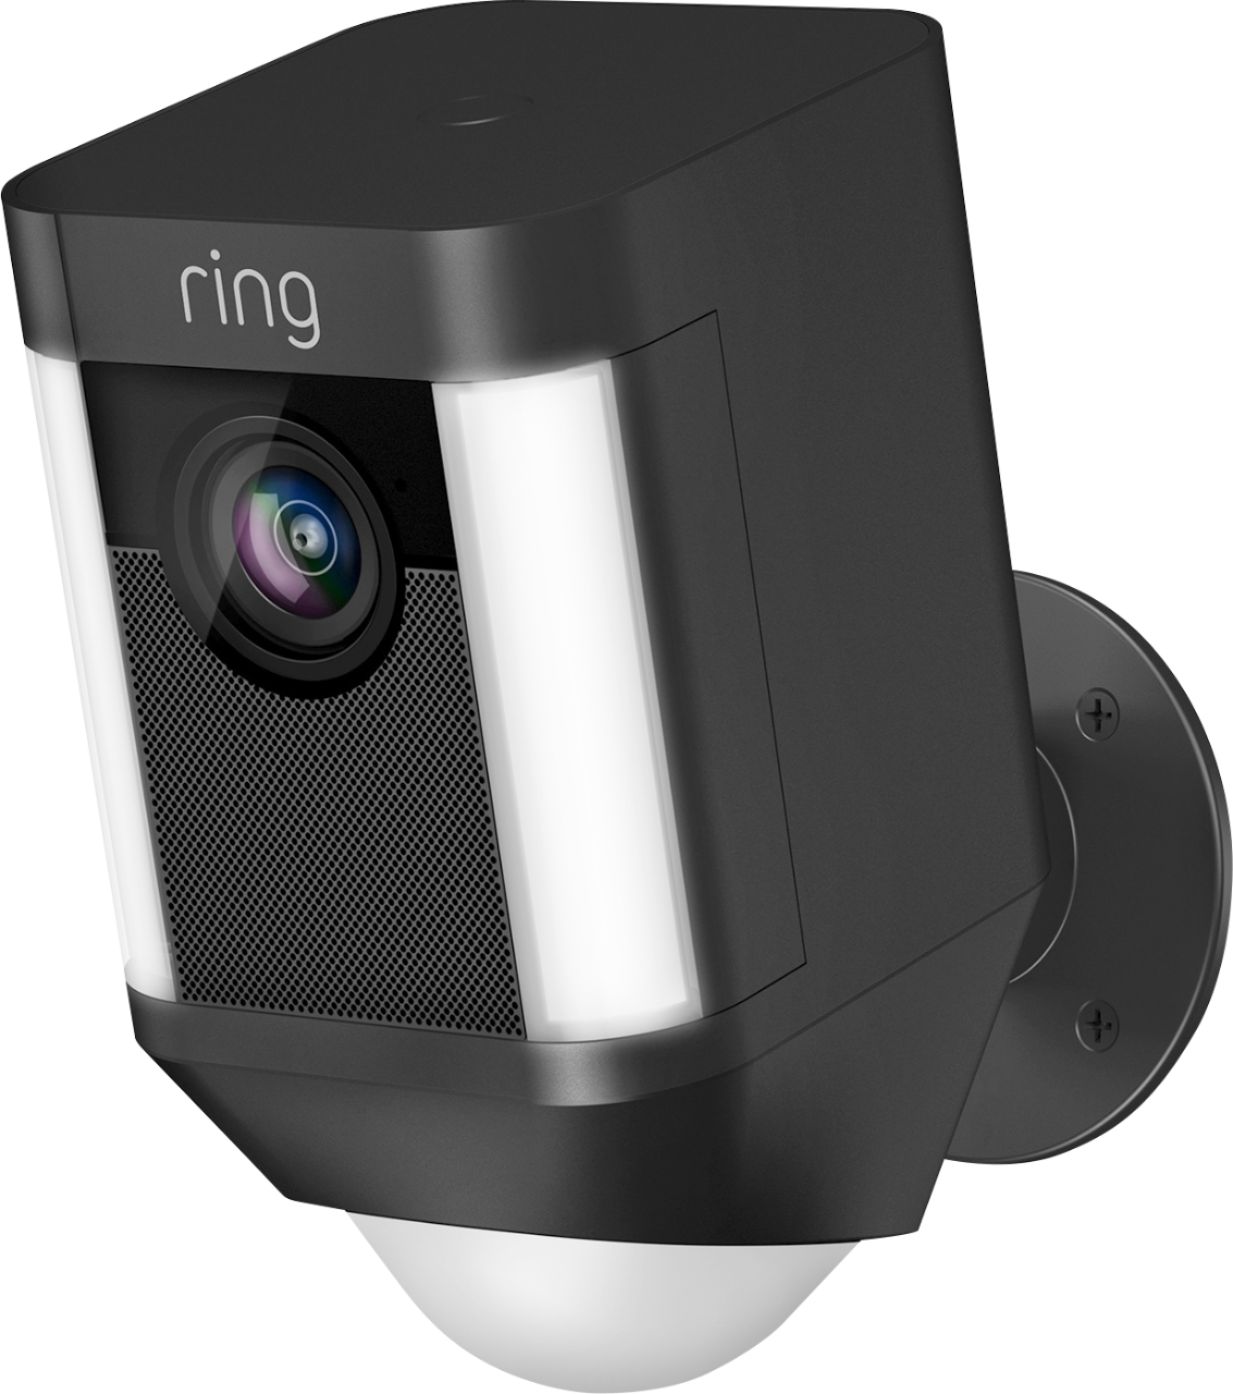 ring doorbell black and white at night